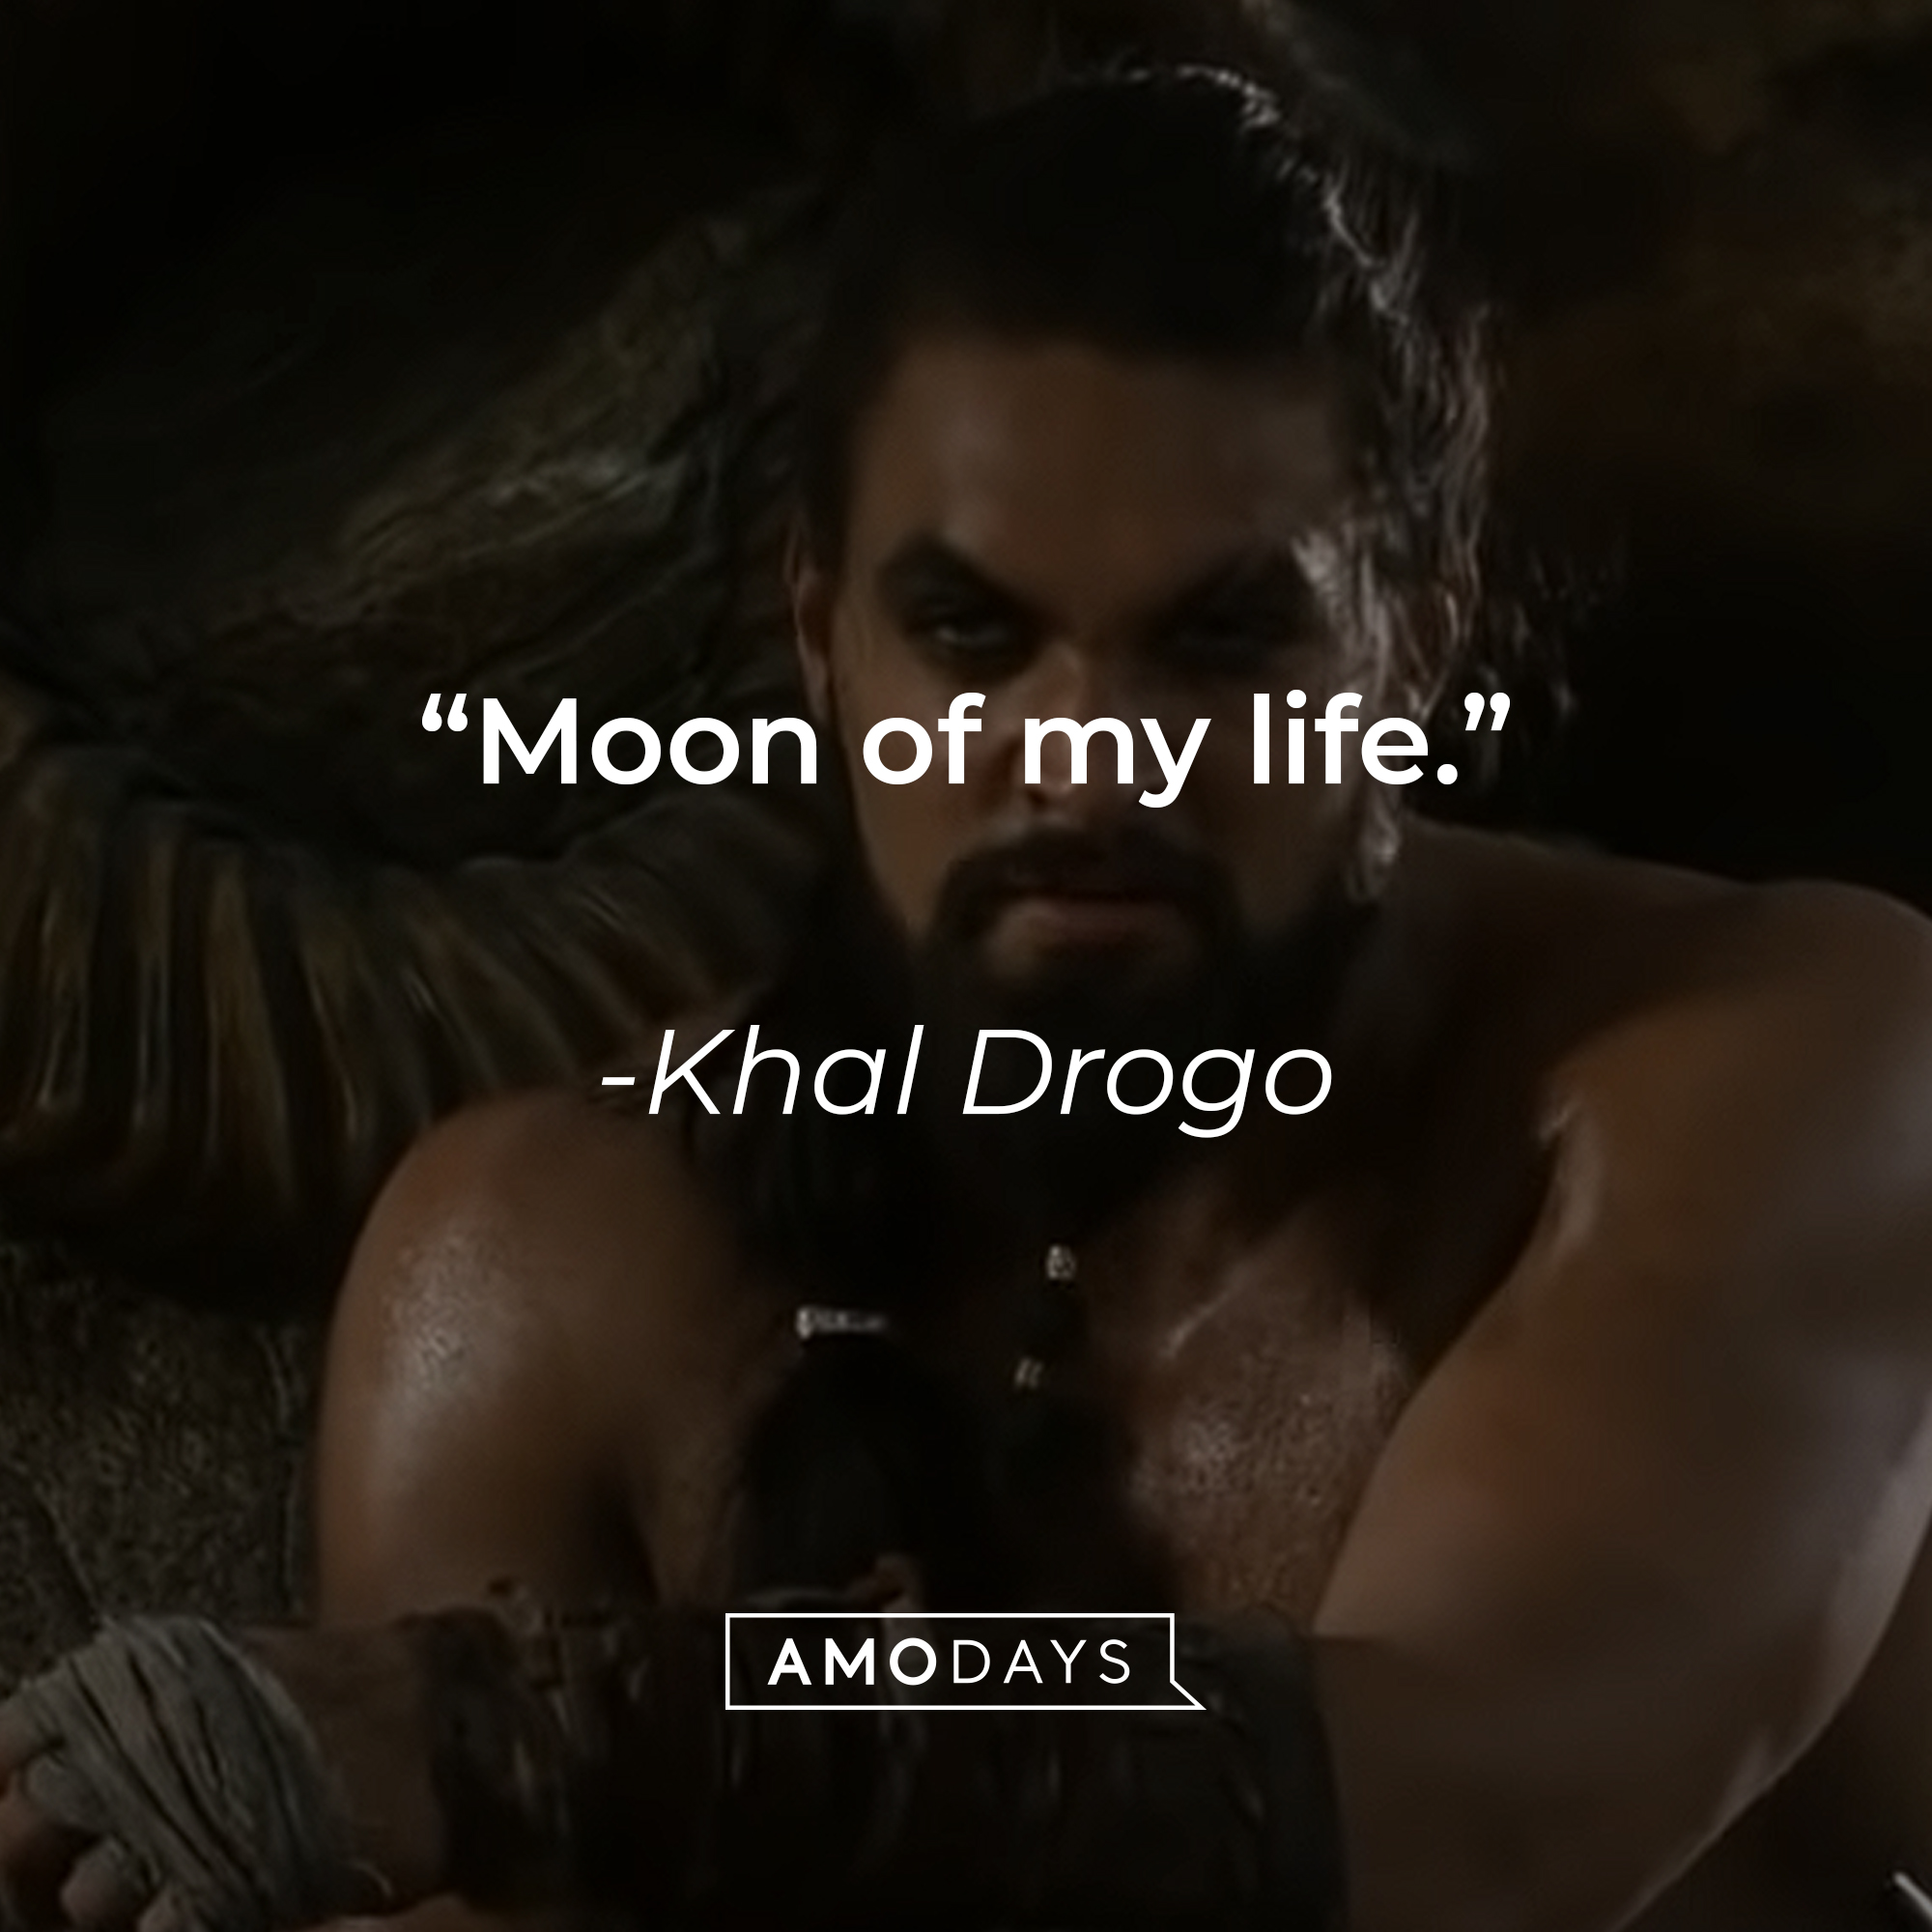 Khal Drogo's quote: "Moon of my life." | Source: youtube.com/gameofthrones